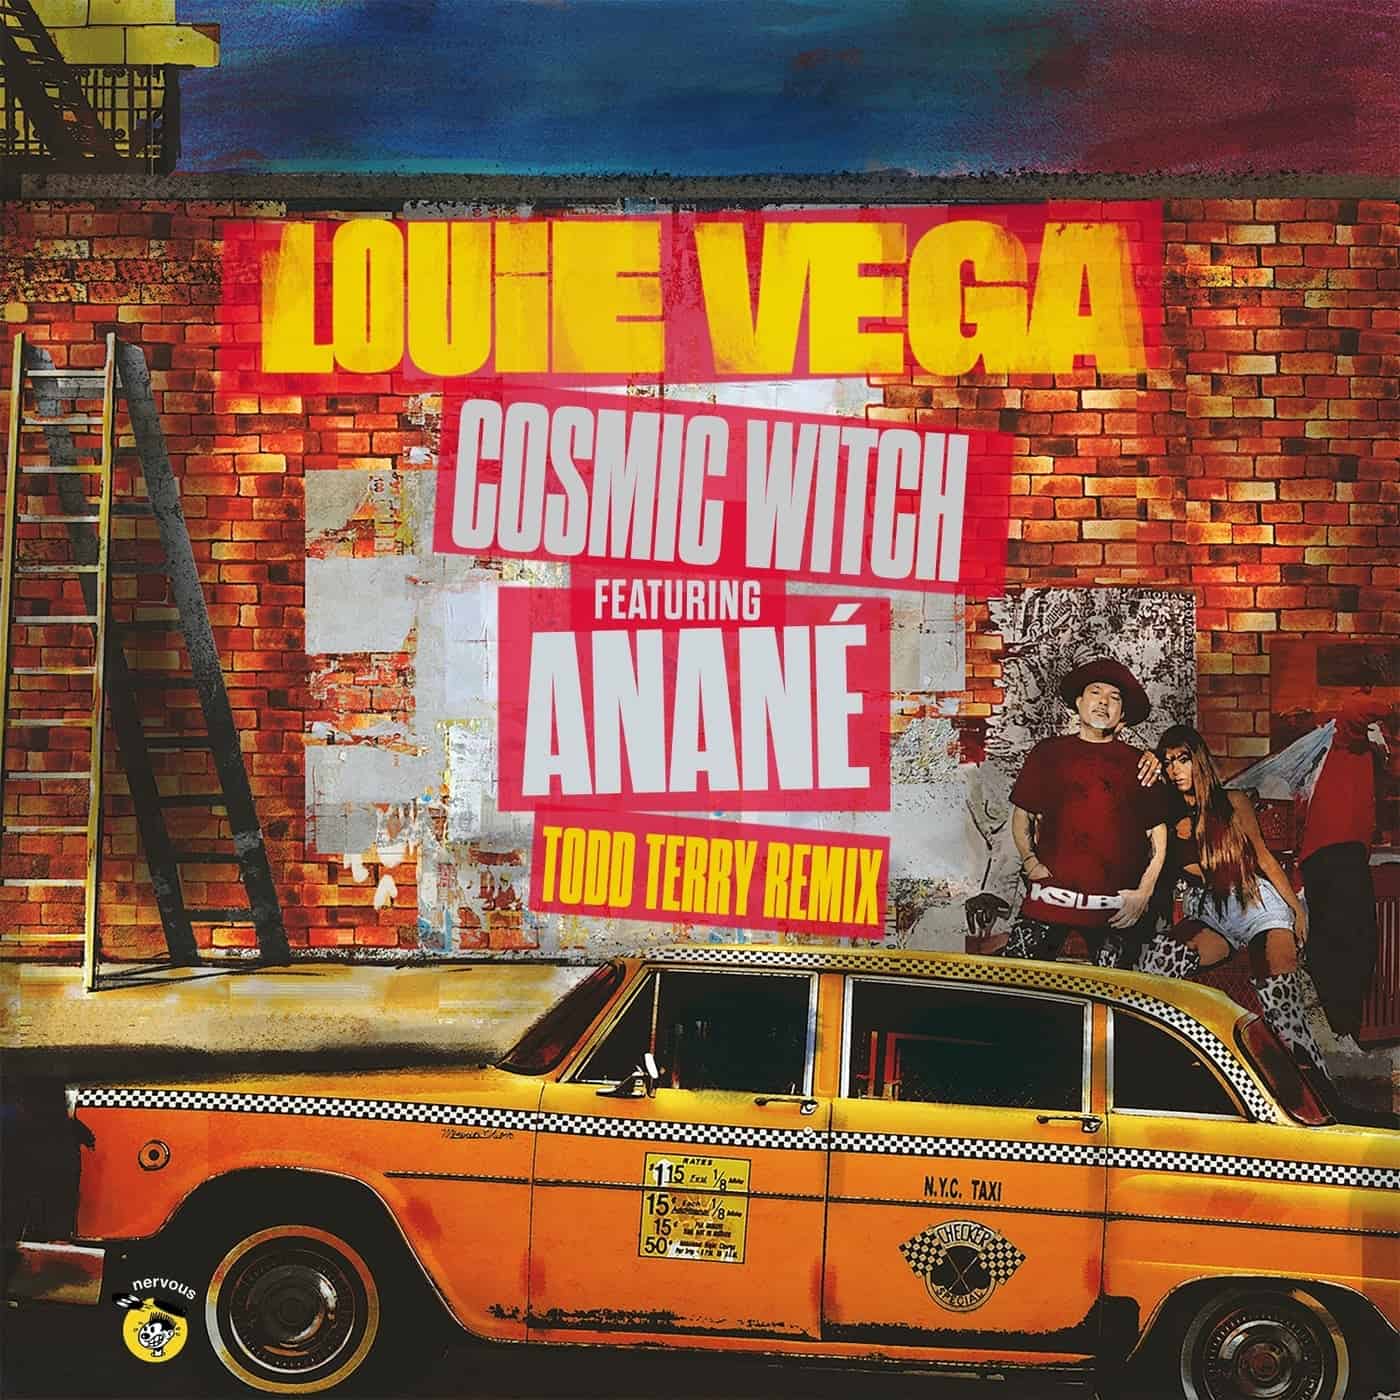 Download Louie Vega, Anane - Cosmic Witch feat. Anané (Todd Terry Remix) on Electrobuzz